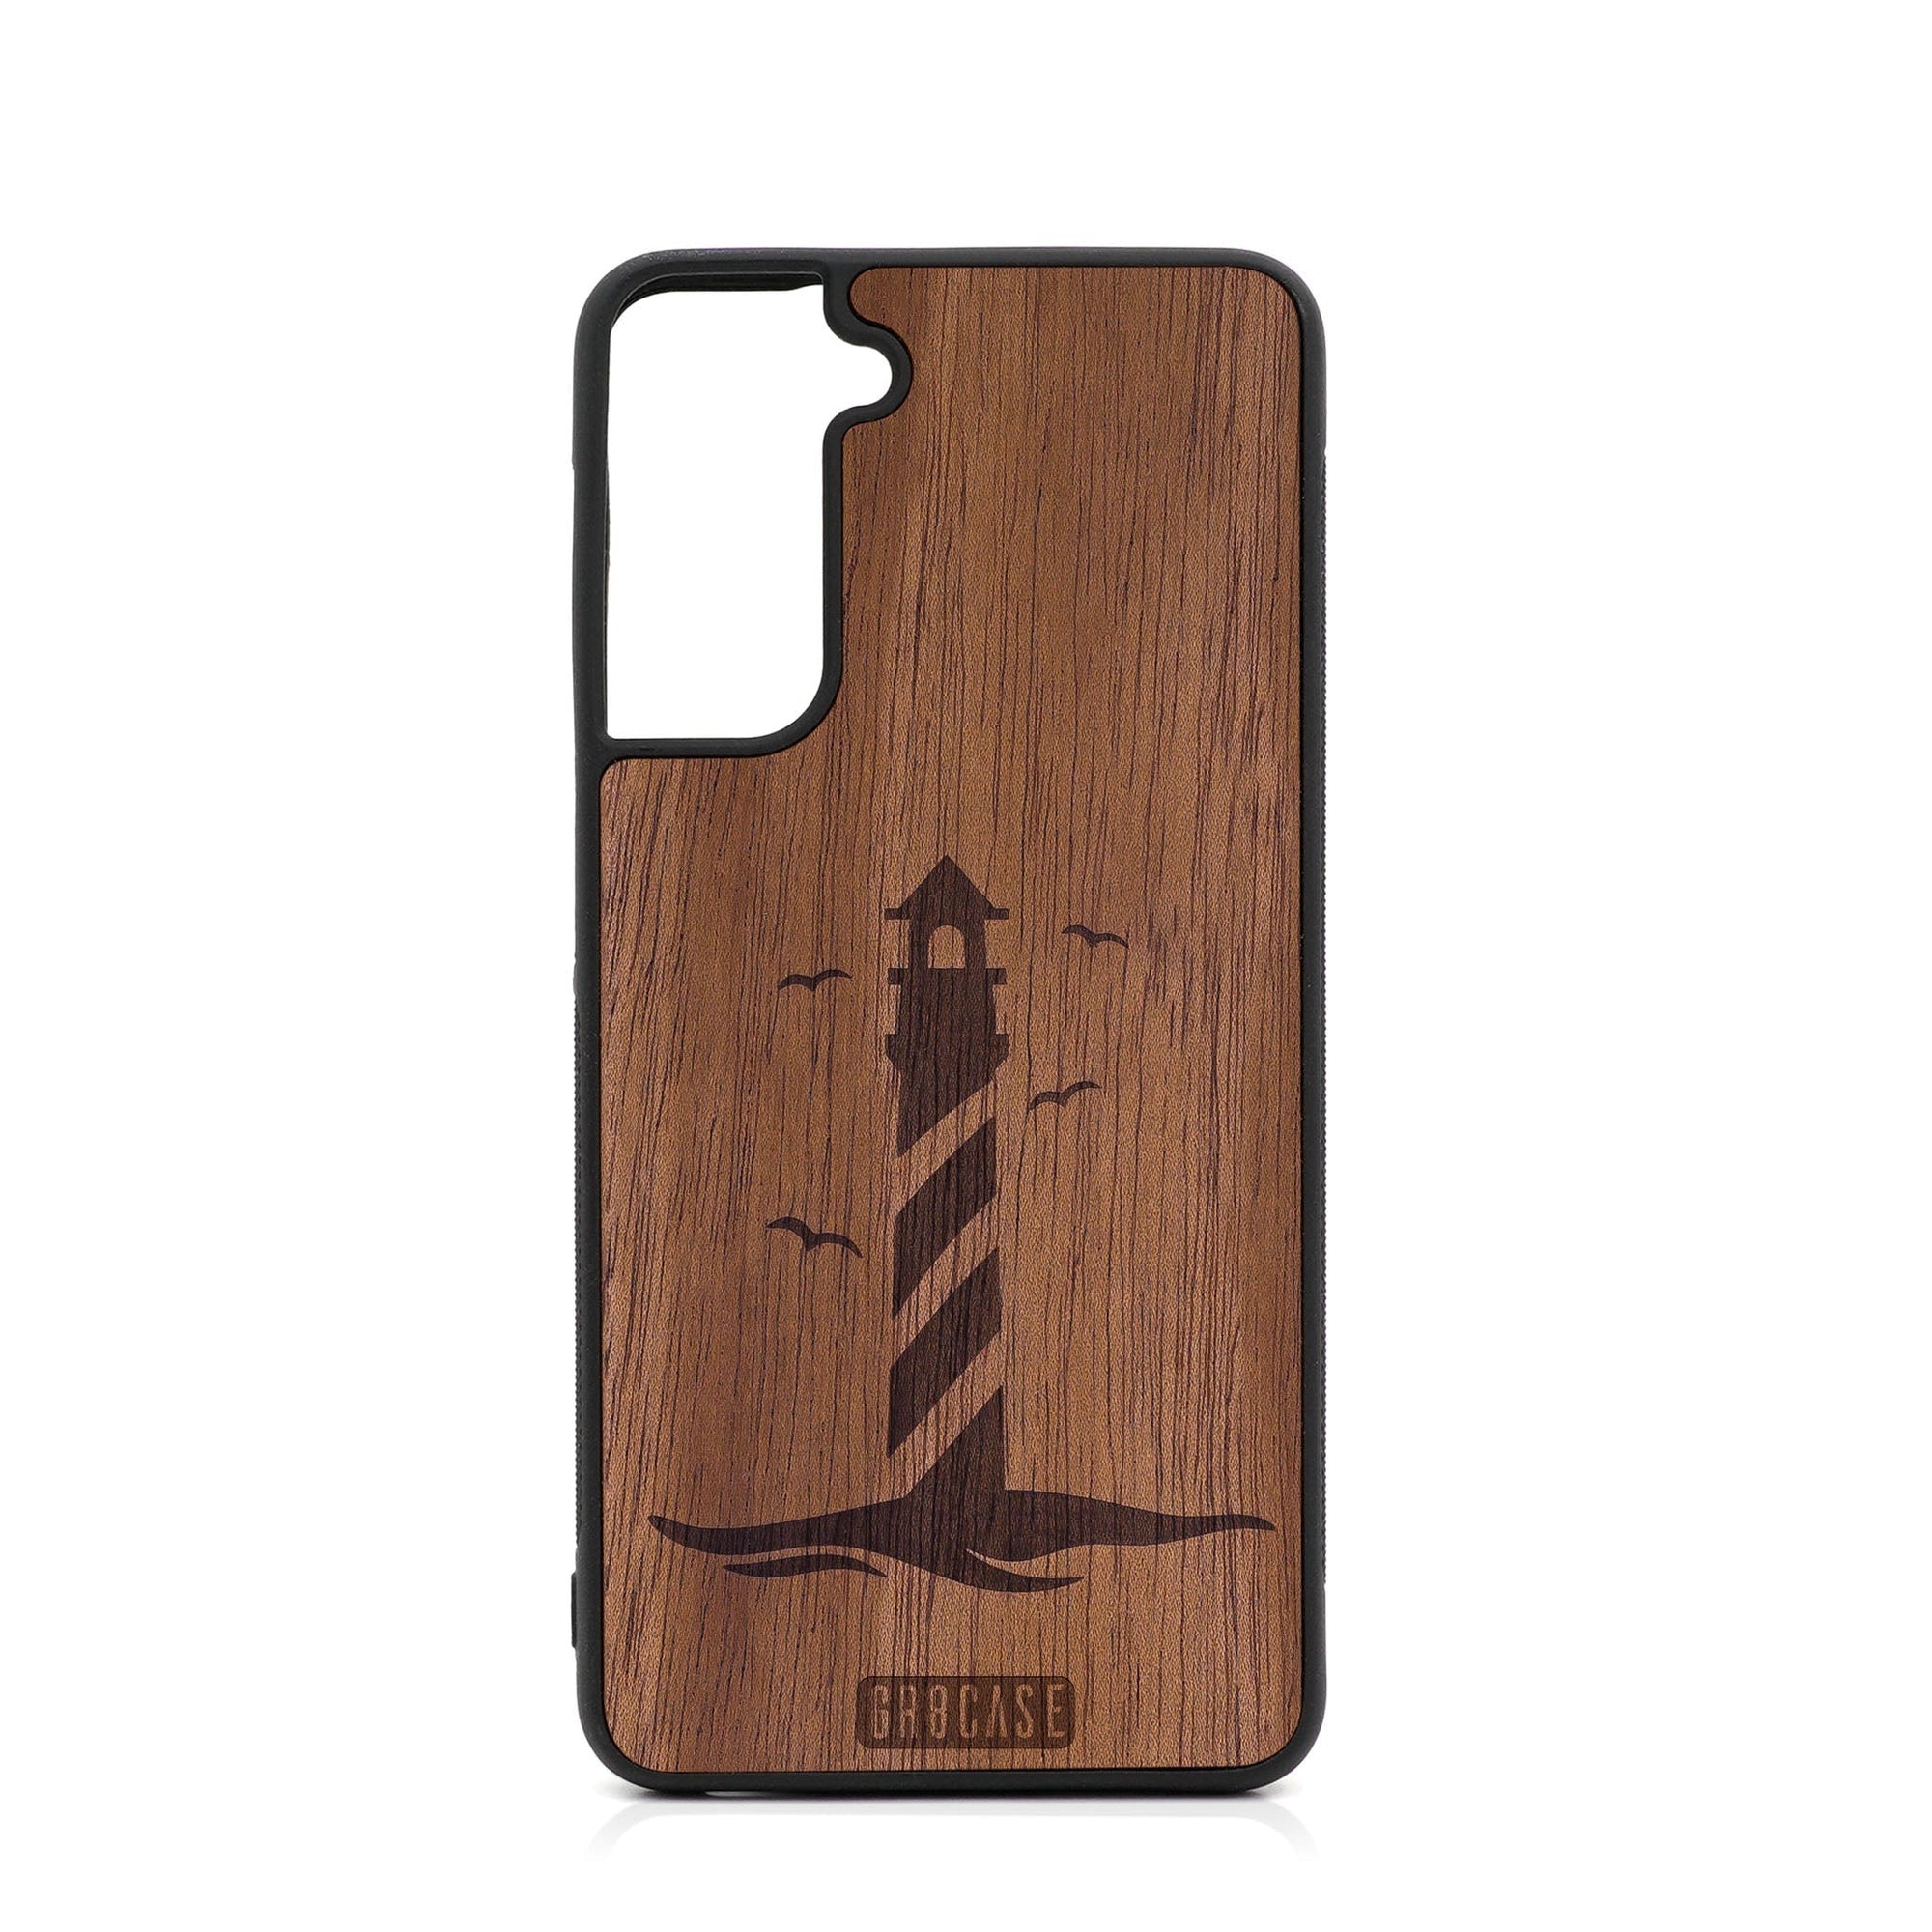 Lighthouse Design Wood Case For Samsung Galaxy S21 FE 5G